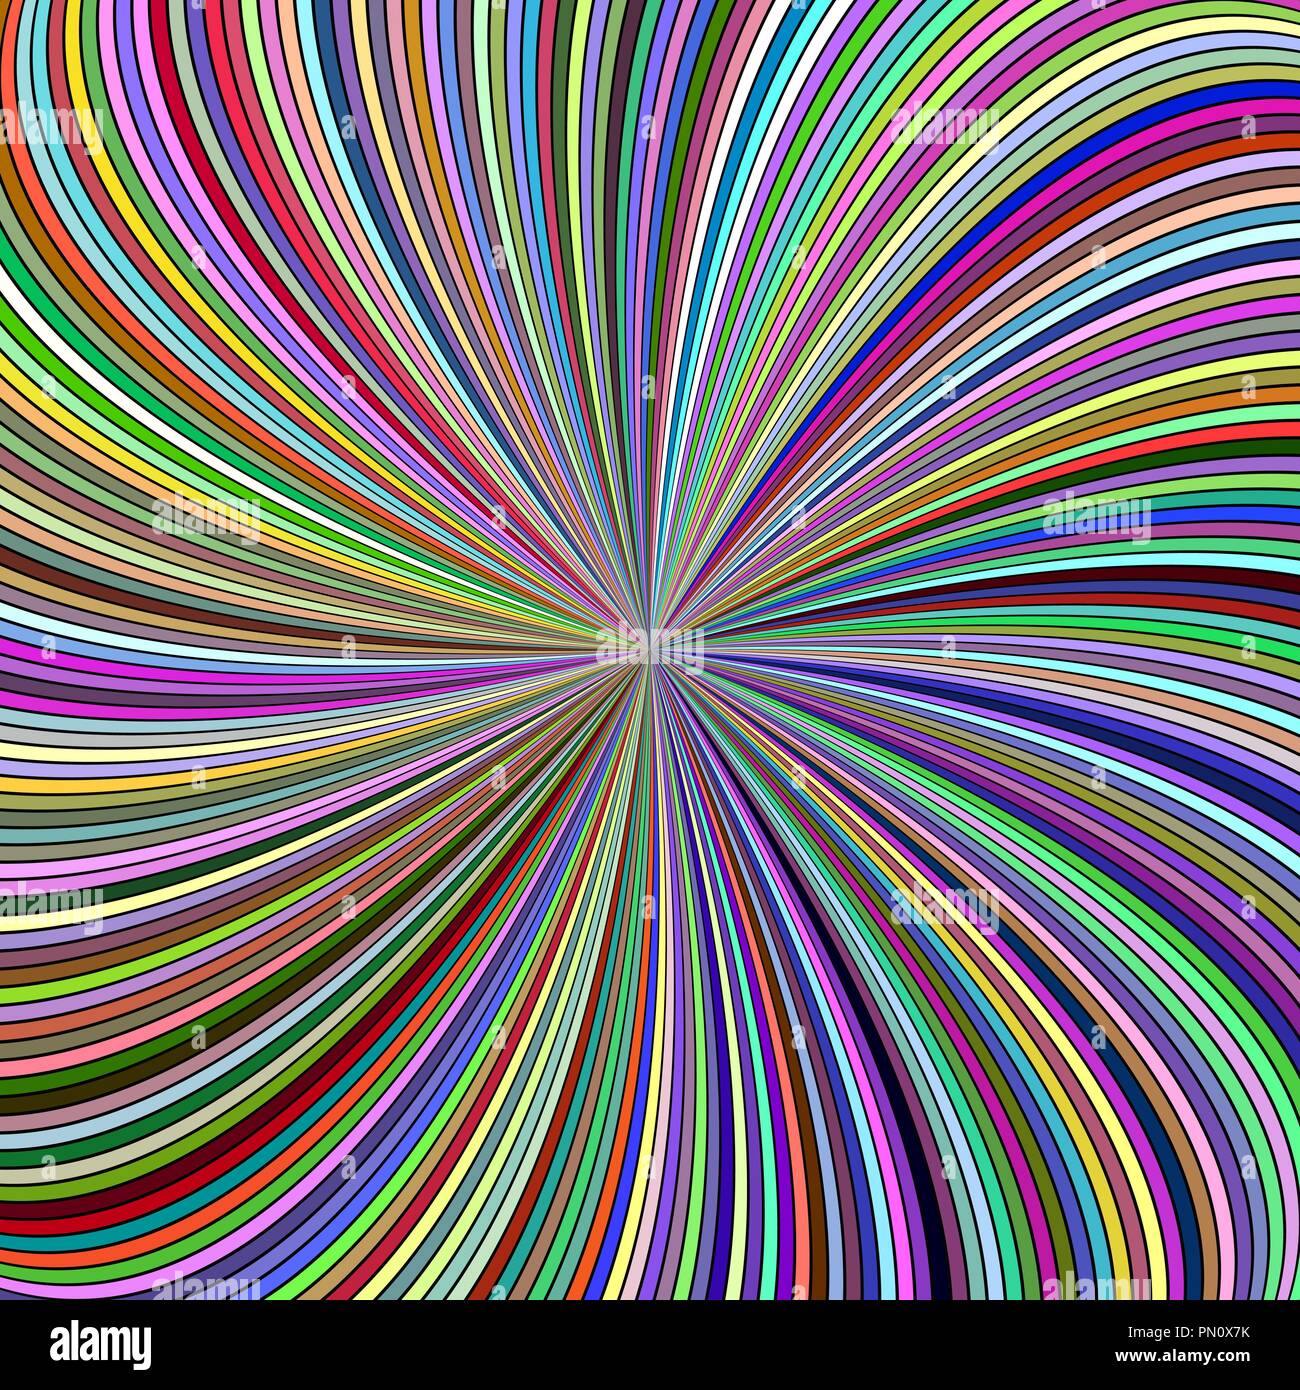 Colorful abstract psychedelic striped vortex background design from curved rays Stock Vector